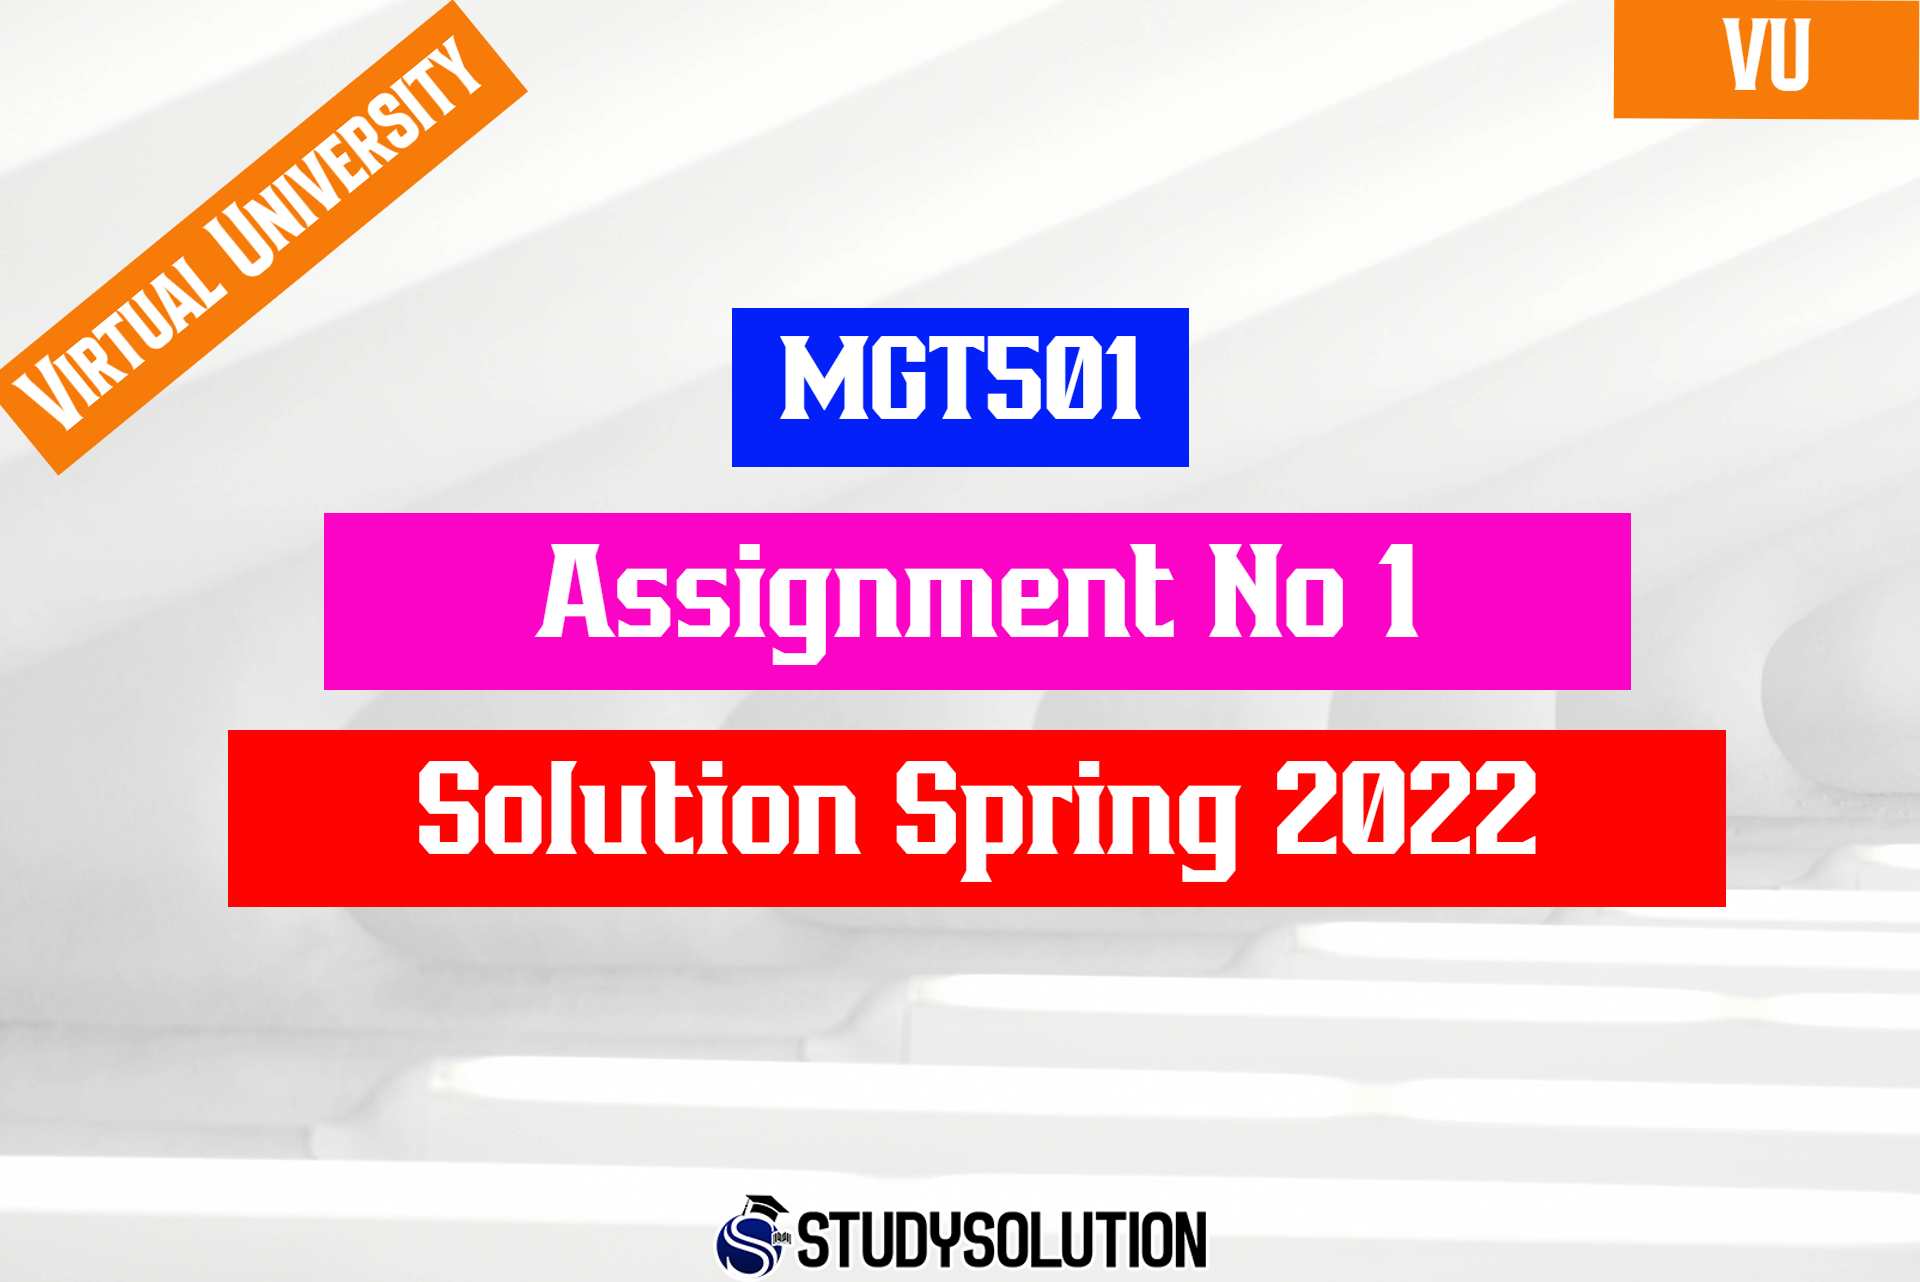 MGT501 Assignment No 1 Solution Spring 2022